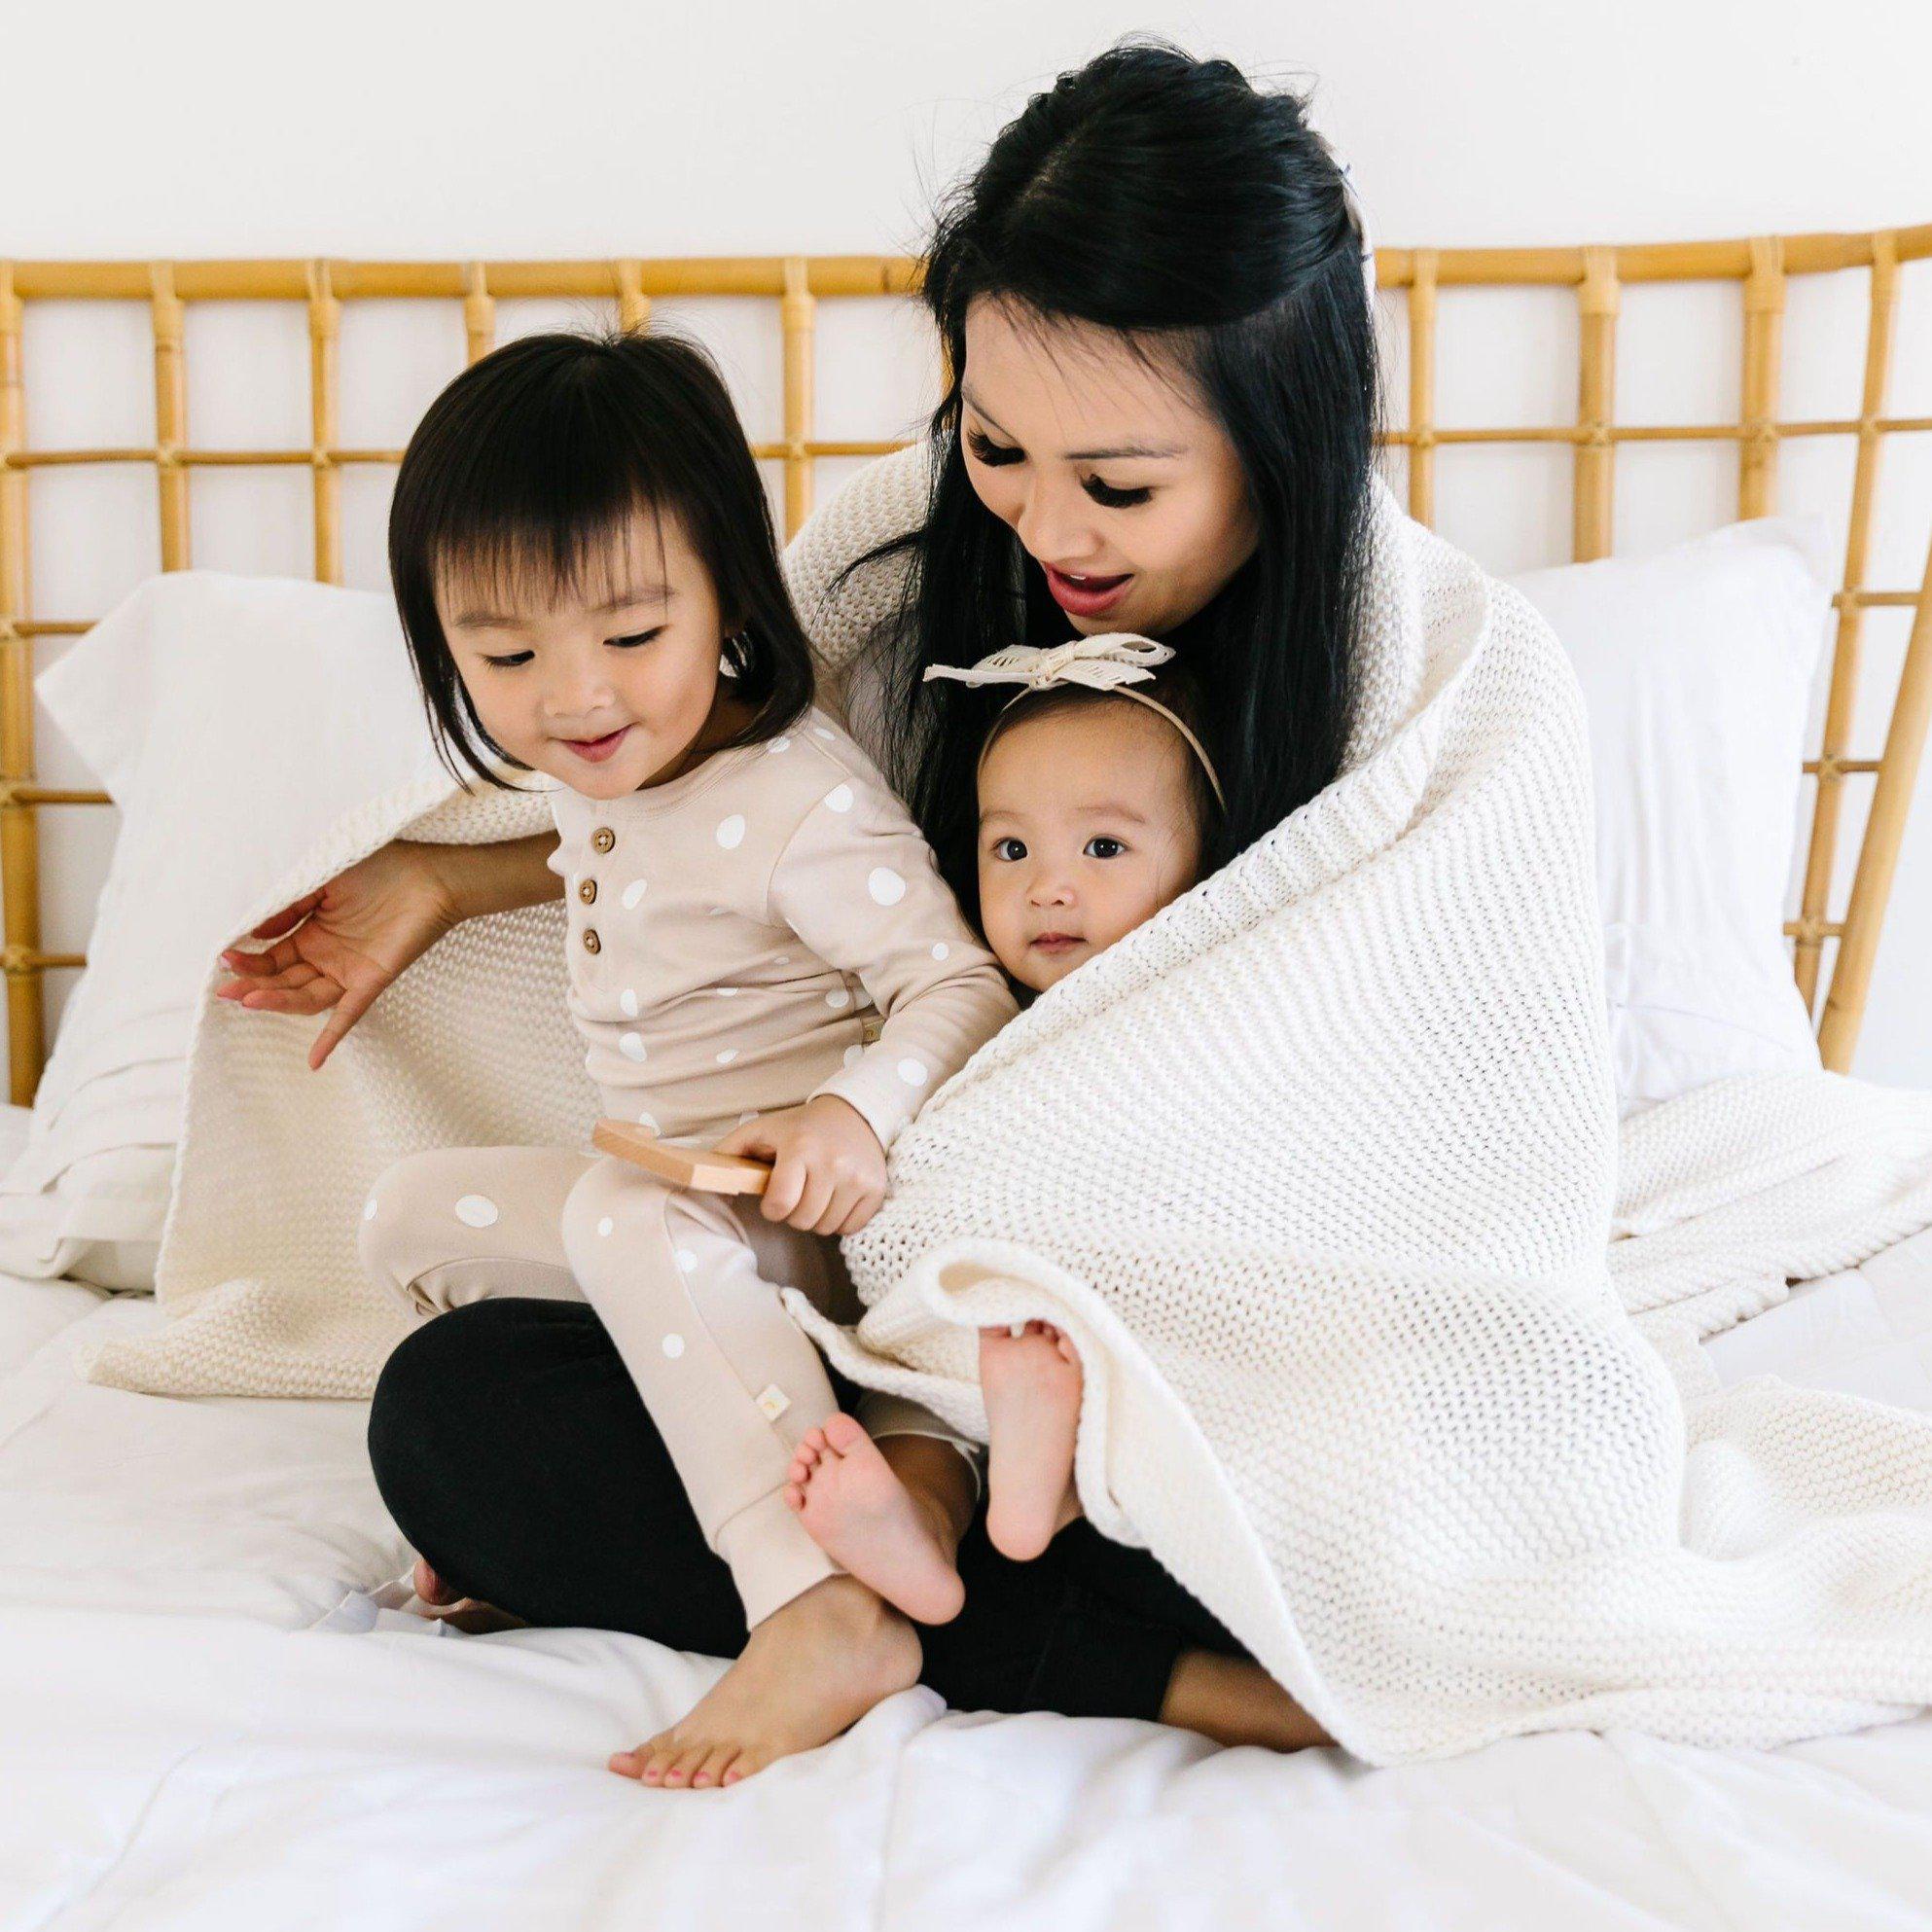 A mother and her two young children wearing pajamas are sitting on a bed, covered with a Chunky Knit Throw Blanket - Ella Ivory from Makemake Organics, smiling and enjoying playtime together.